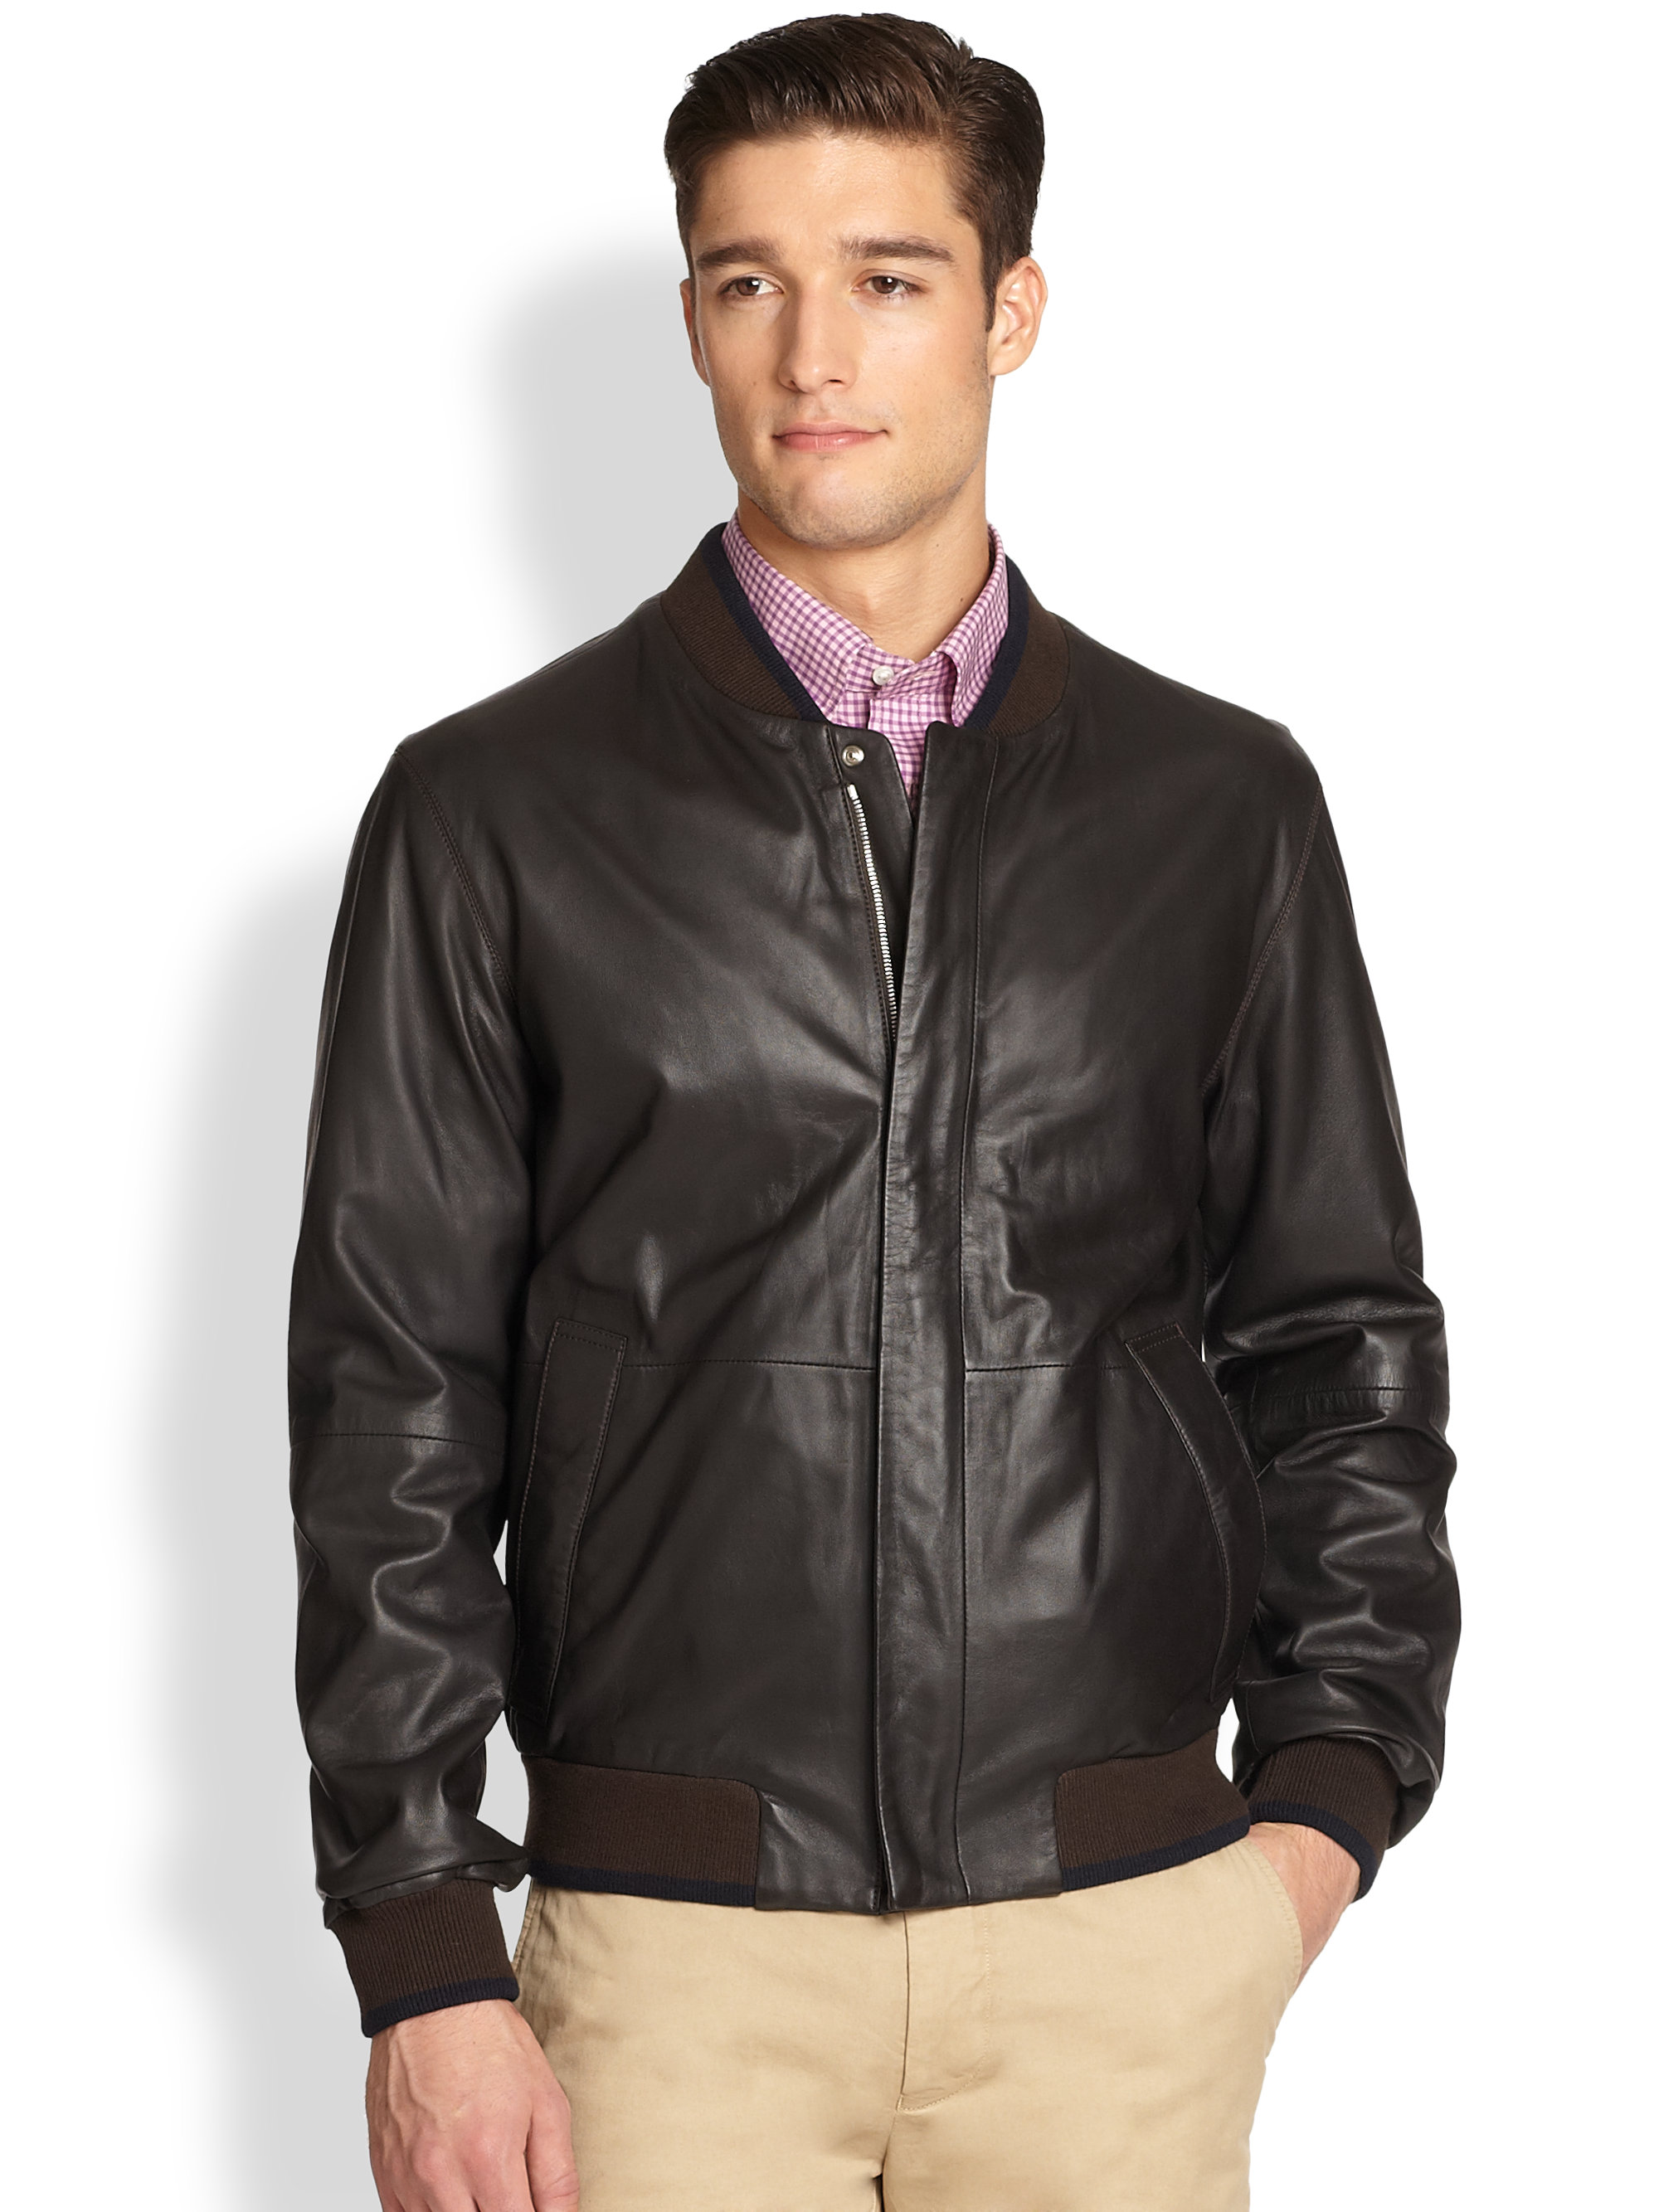 Fa onnable Leather  Bomber  Jacket  in Dark Brown Brown for 